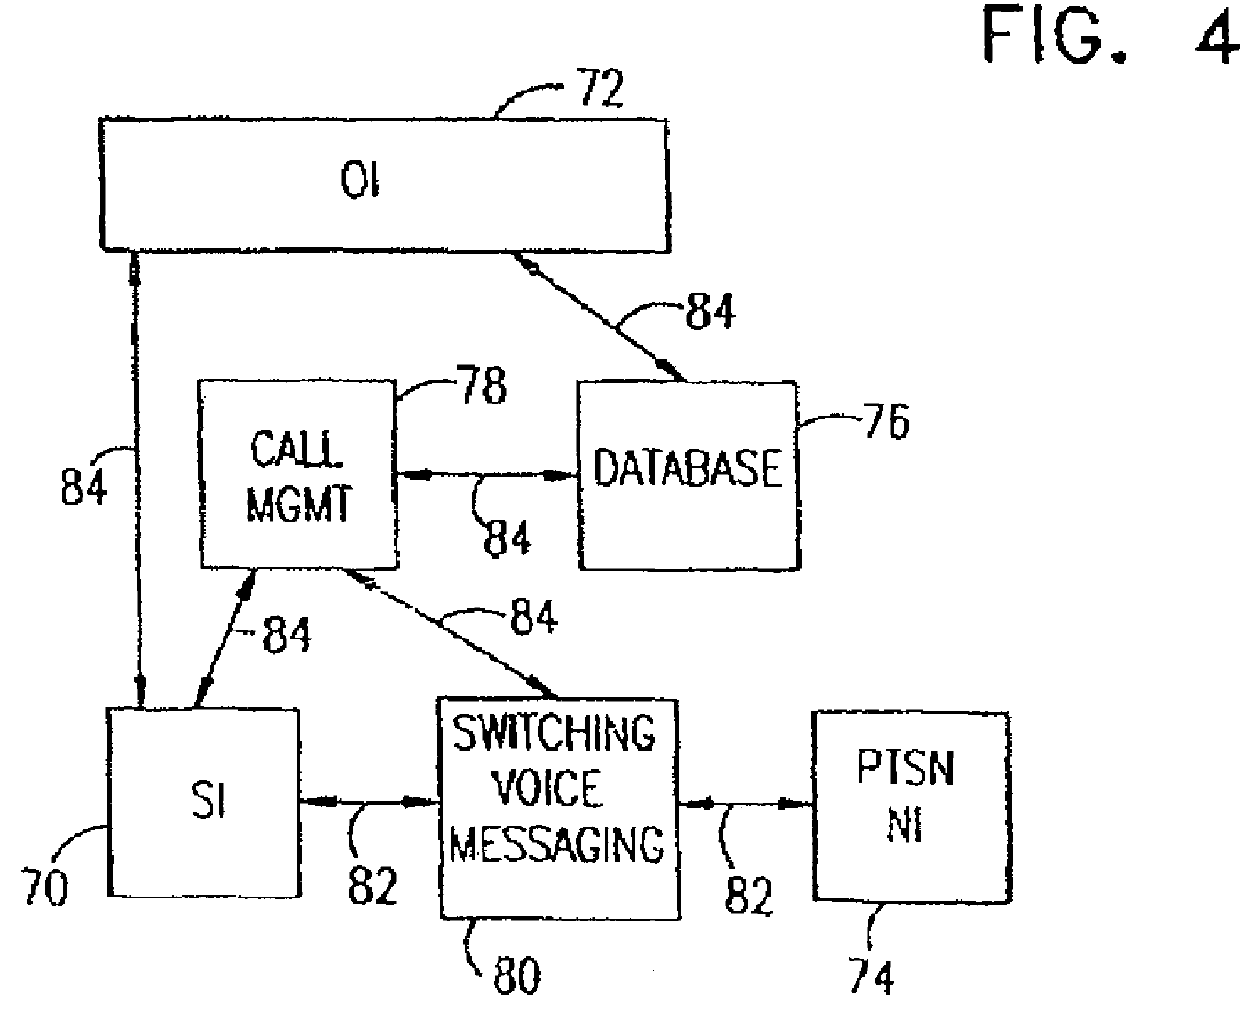 System and method for managing multimedia communications across convergent networks